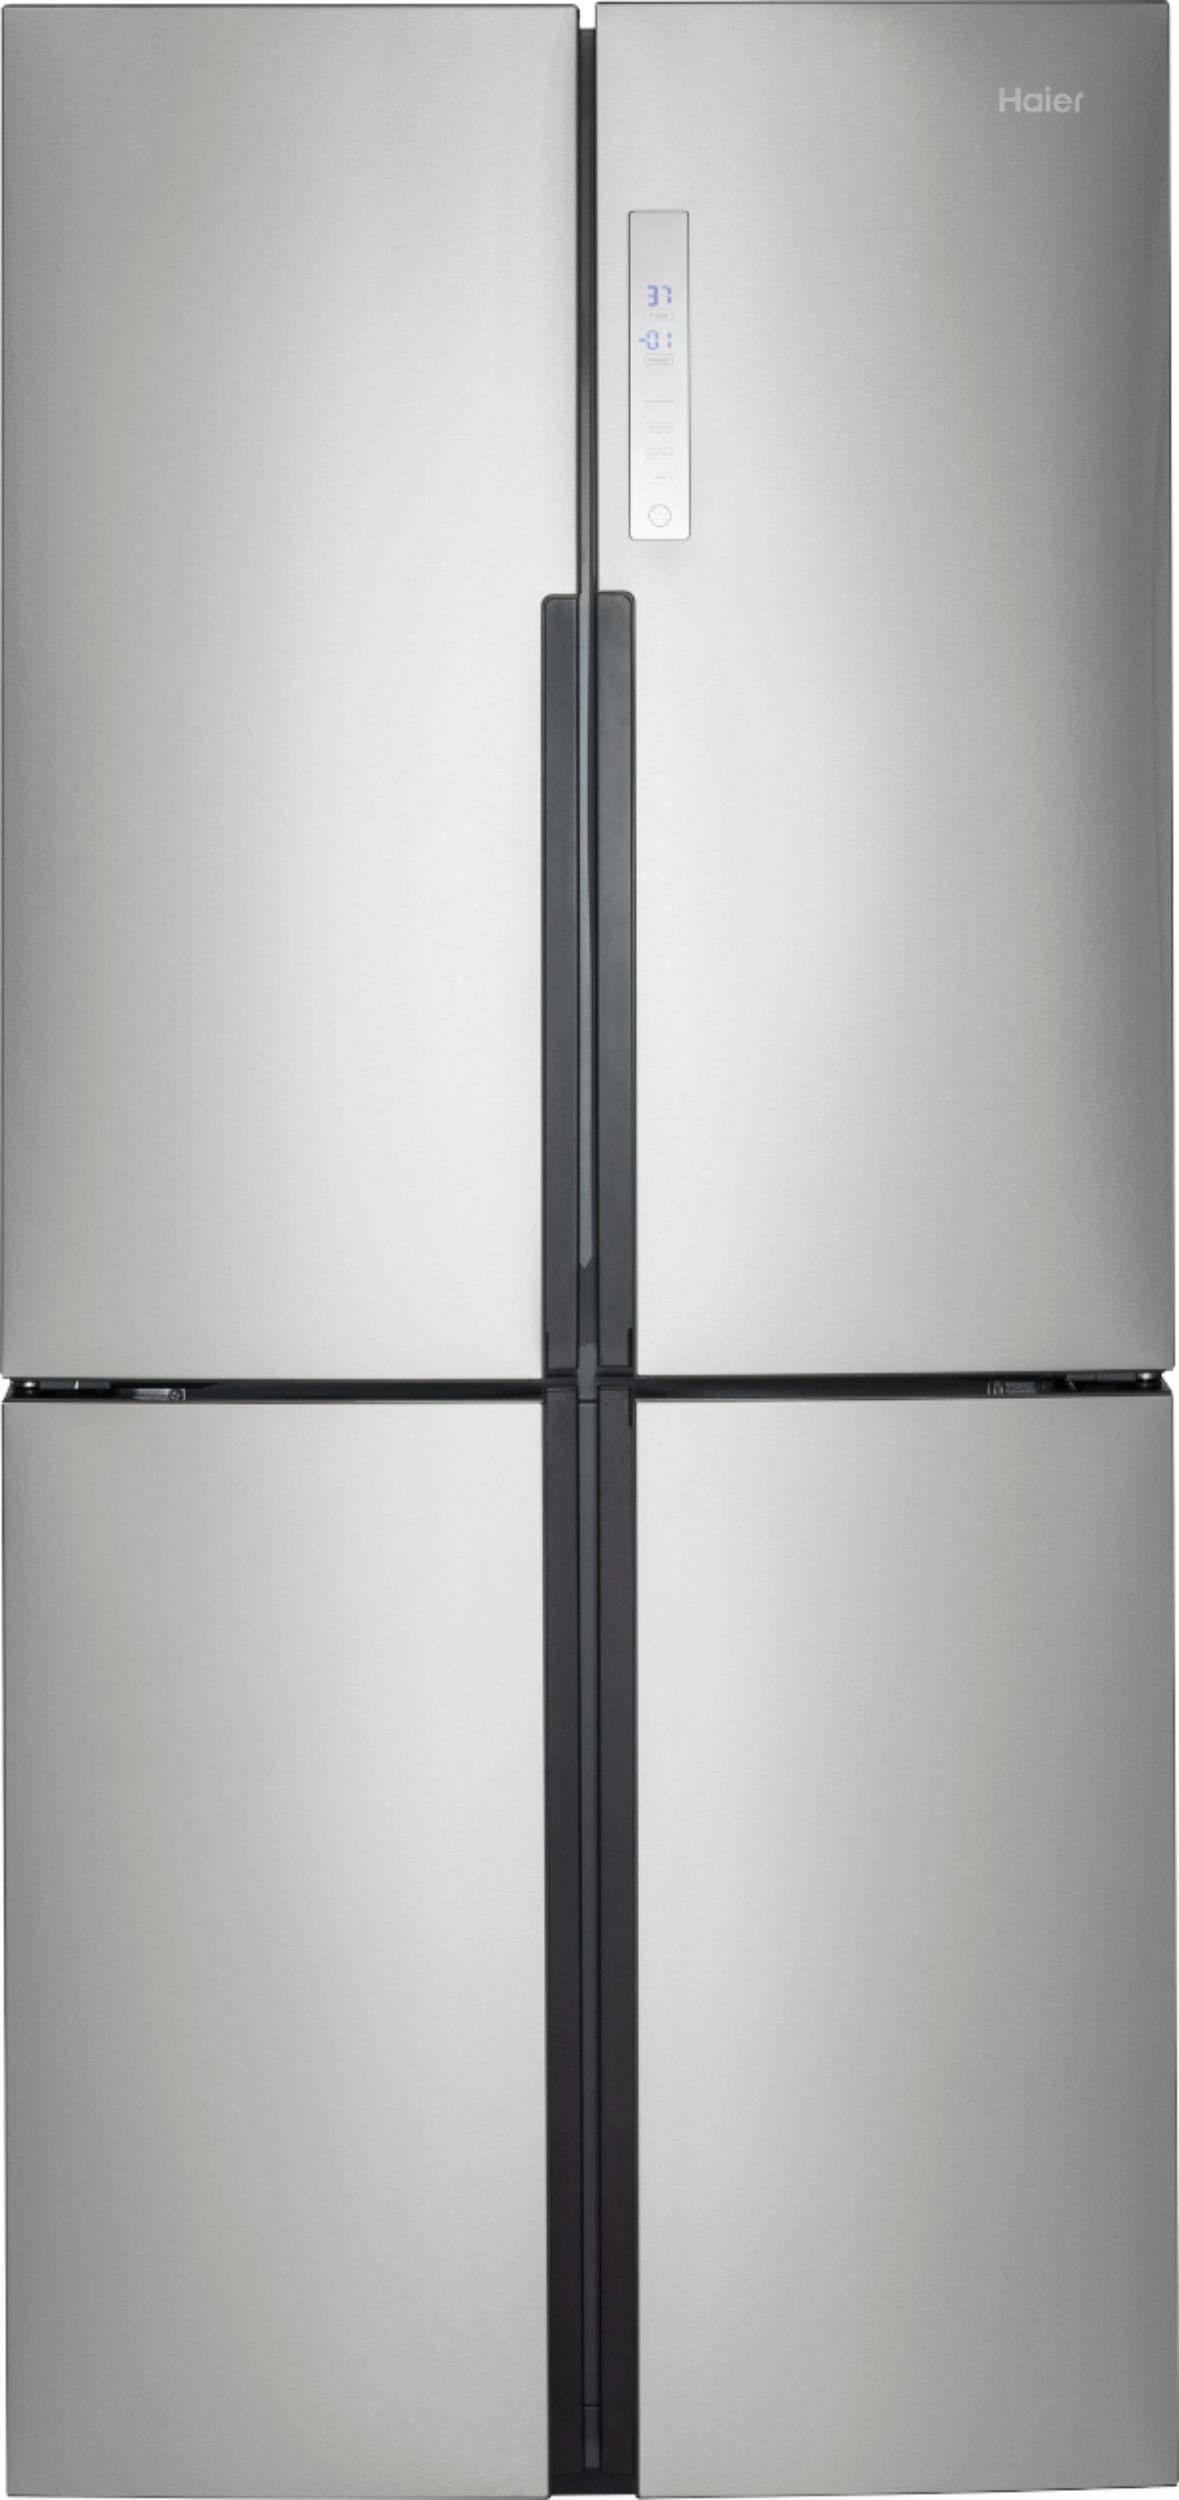 Haier 16 4 Cu Ft Counter Depth Refrigerator Stainless Steel